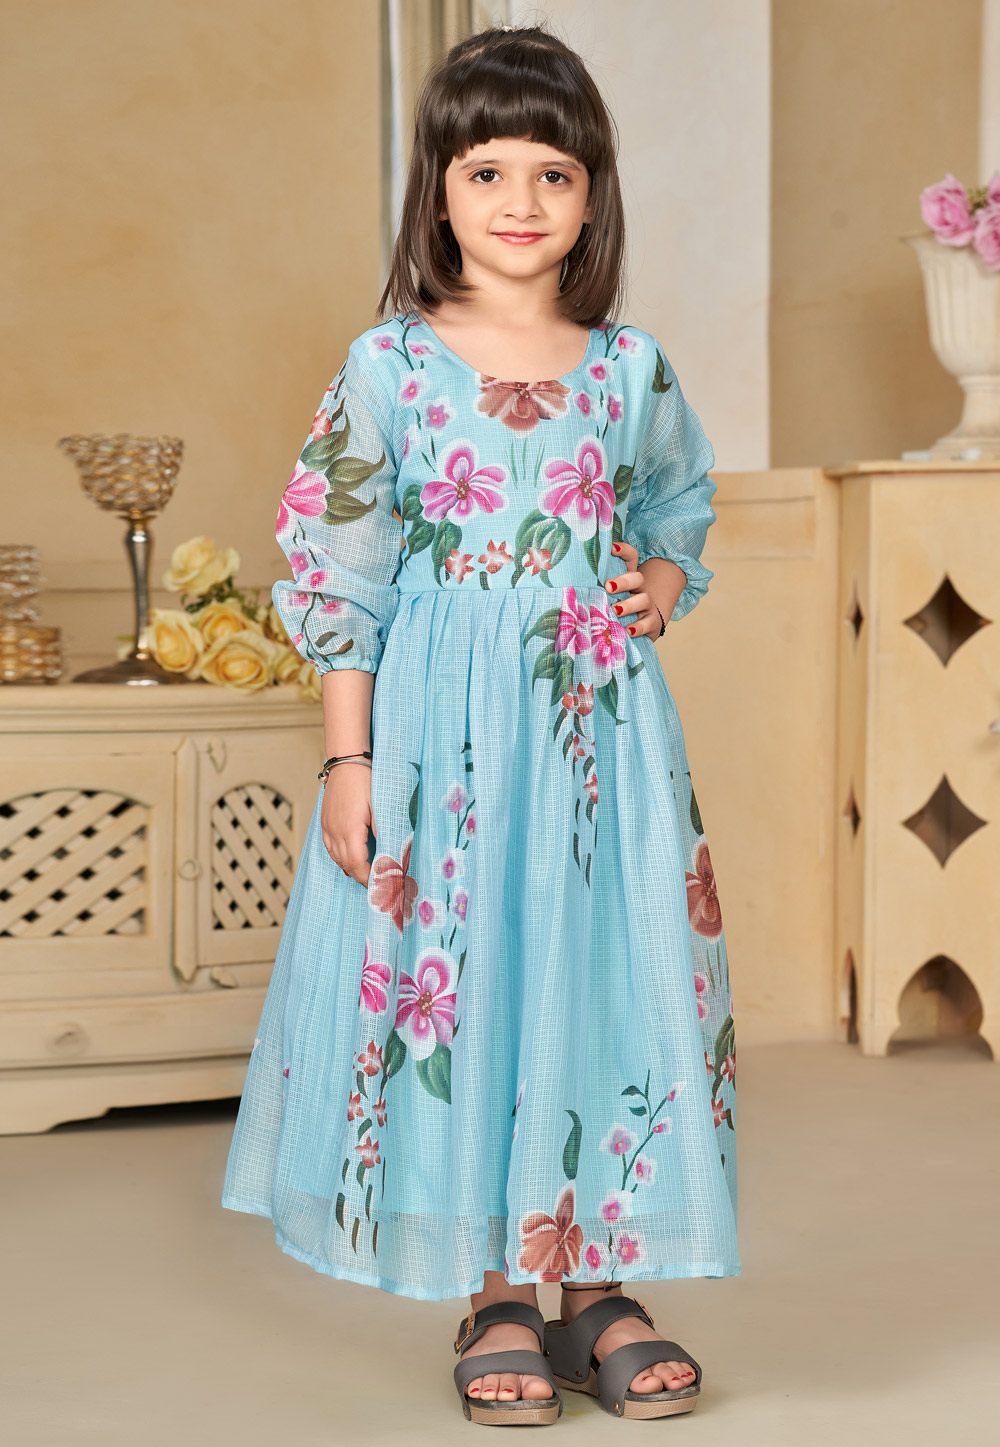 Sky Blue Cotton Readymade Kids Gown 284483